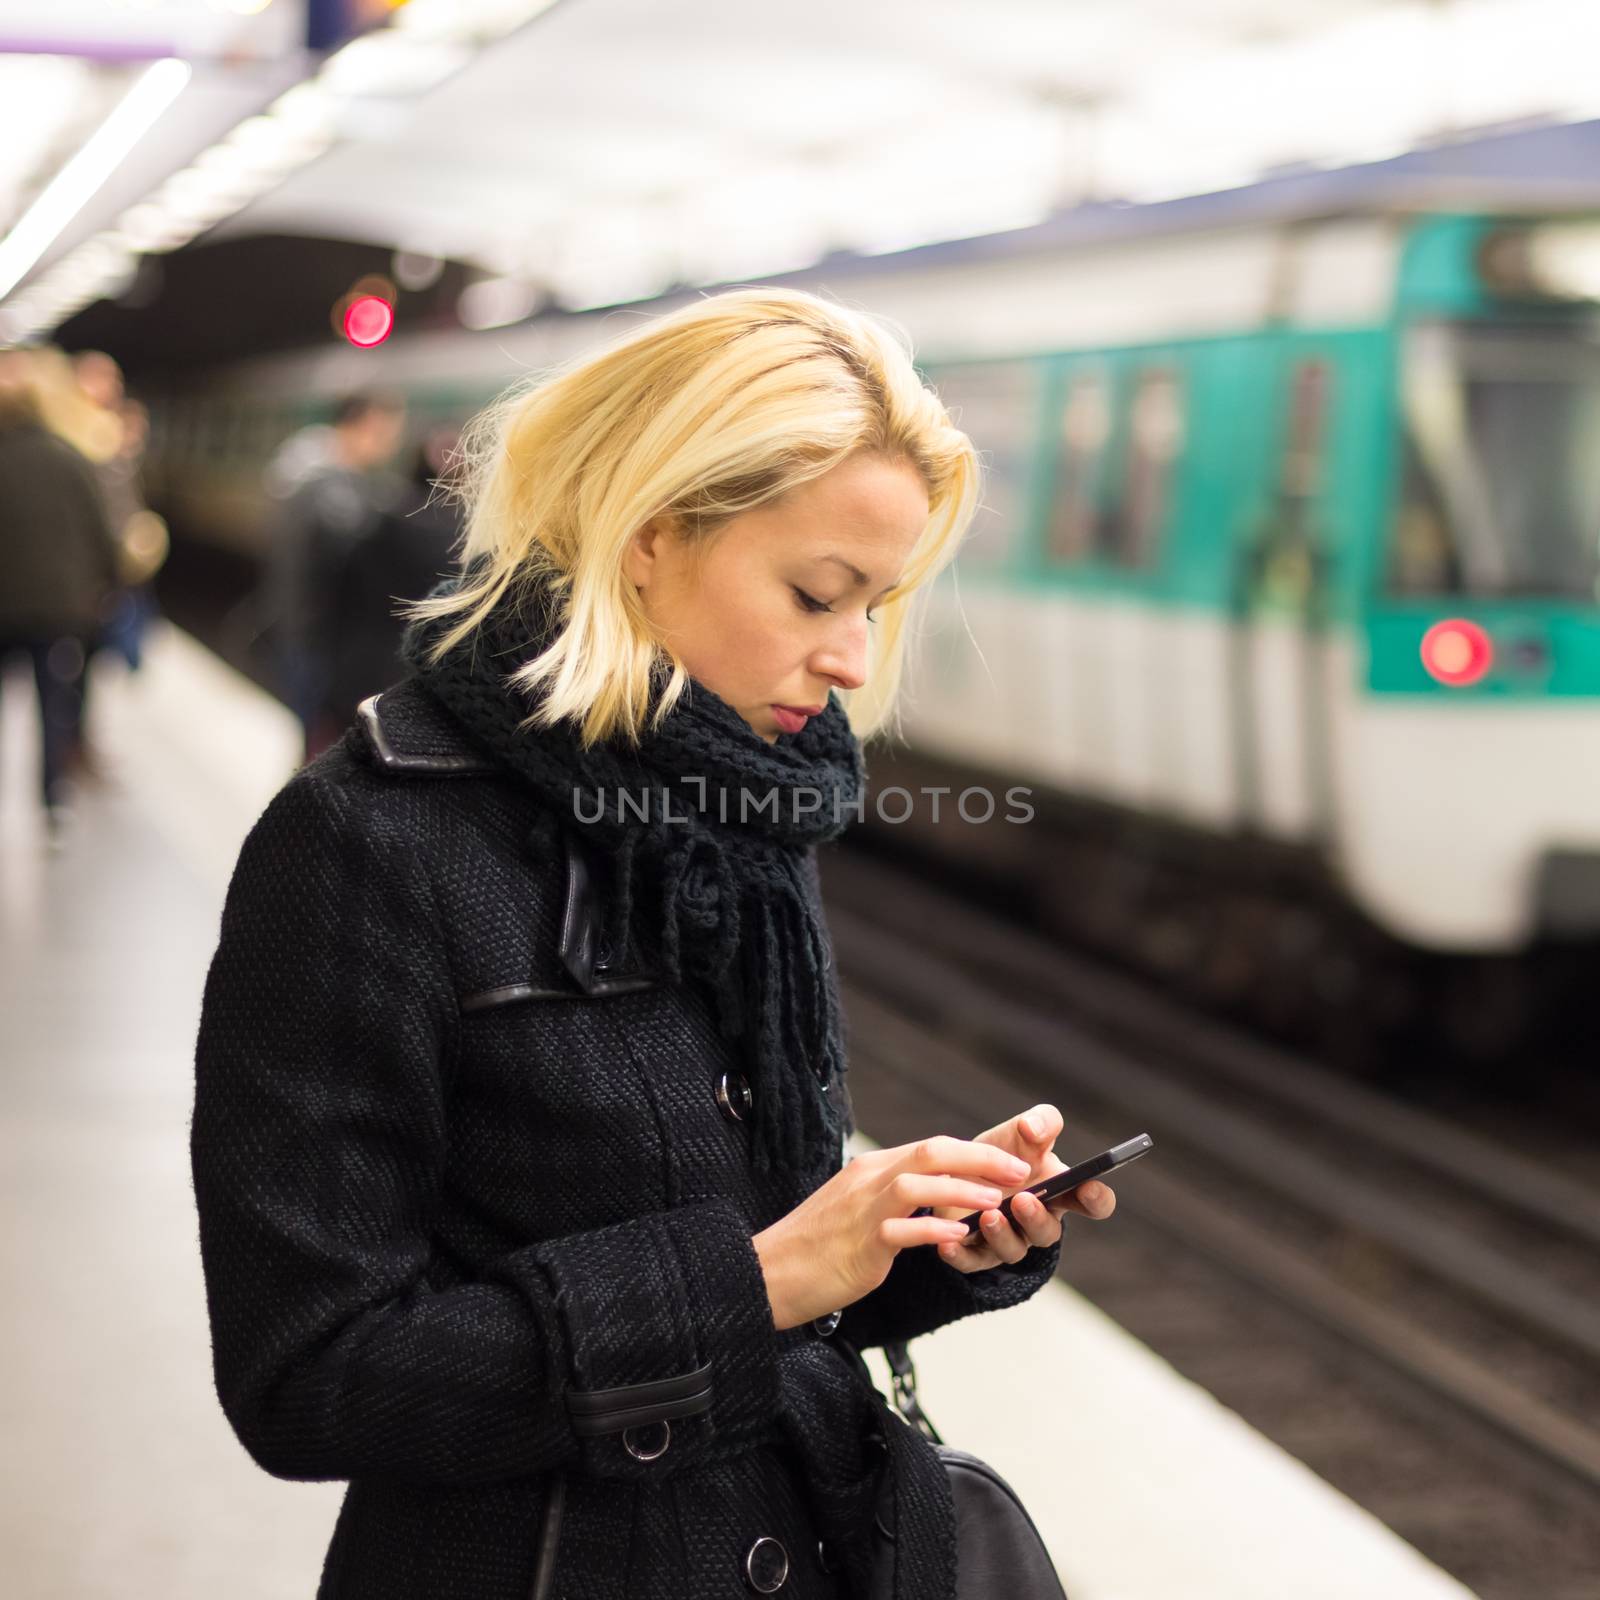 Young woman in winter coat with a cell phone in her hand waiting on the platform of a railway station for train to arrive. Public transport.  